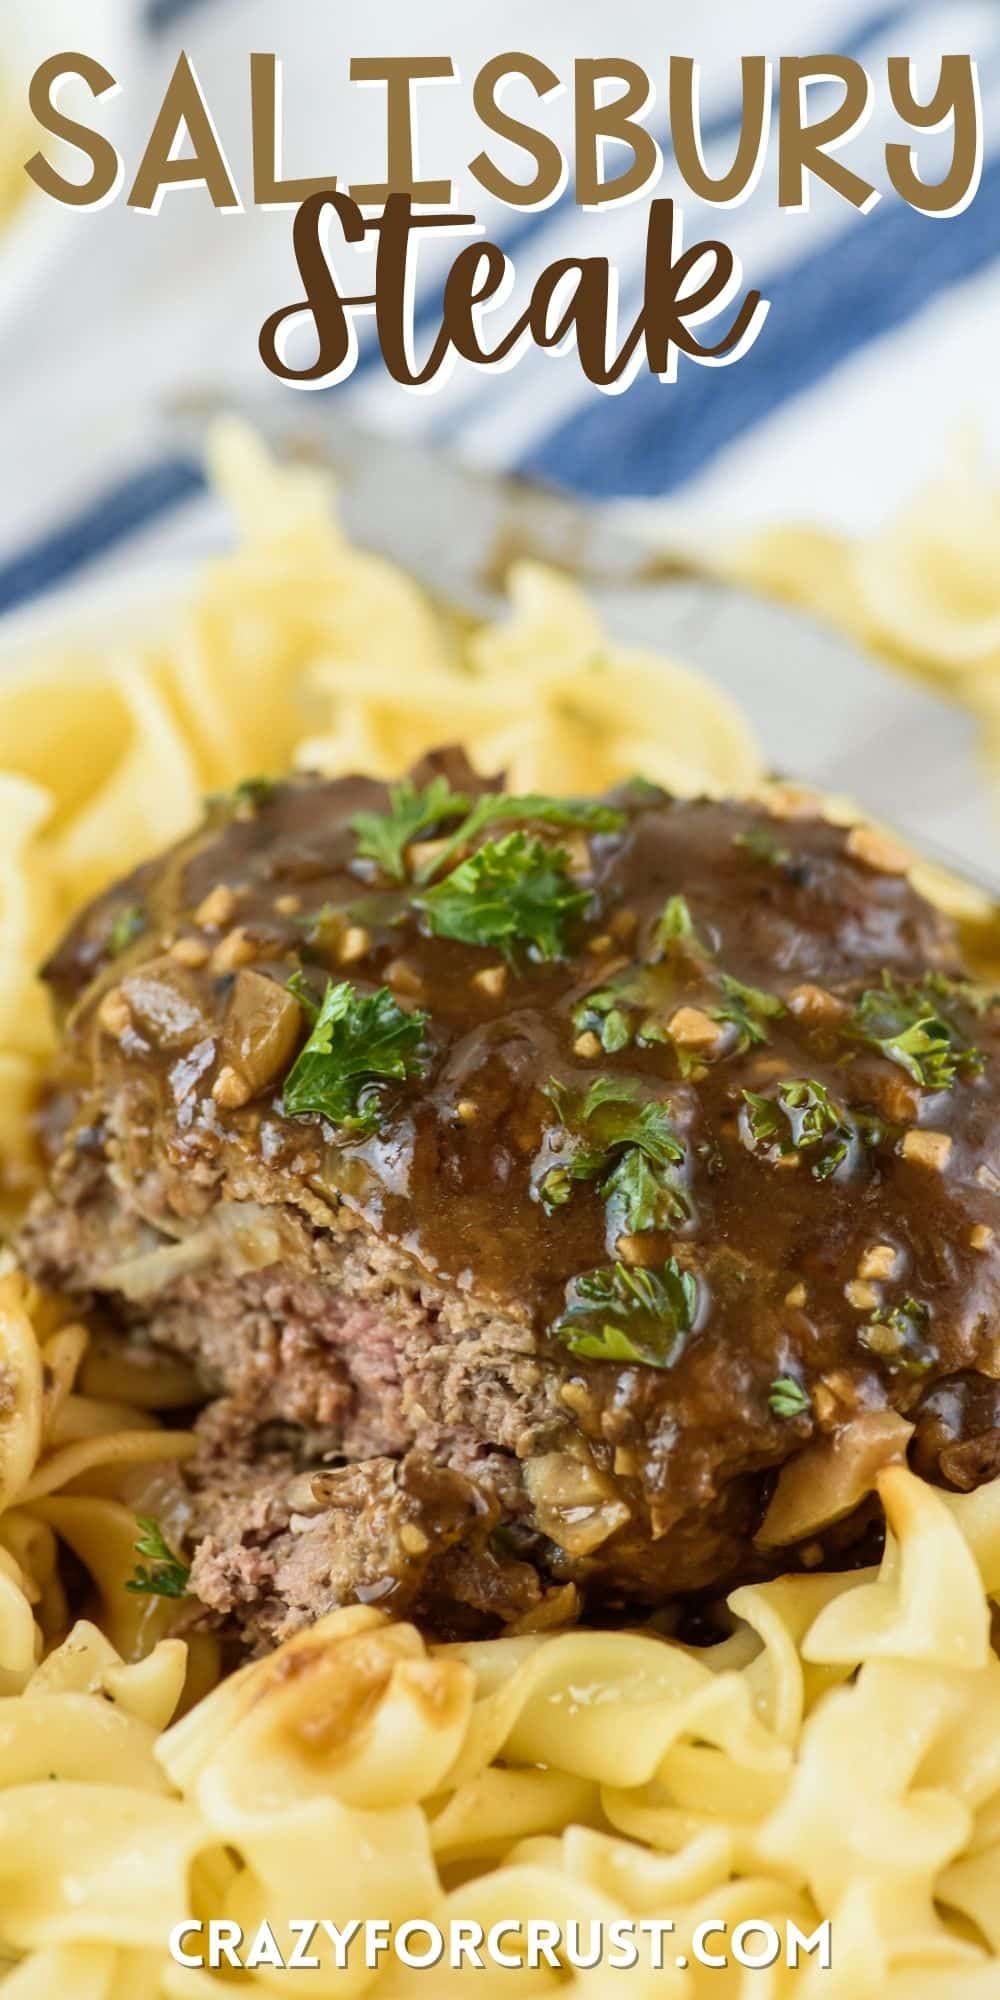 steak on top of pasta and covered in sauce with words on the image.